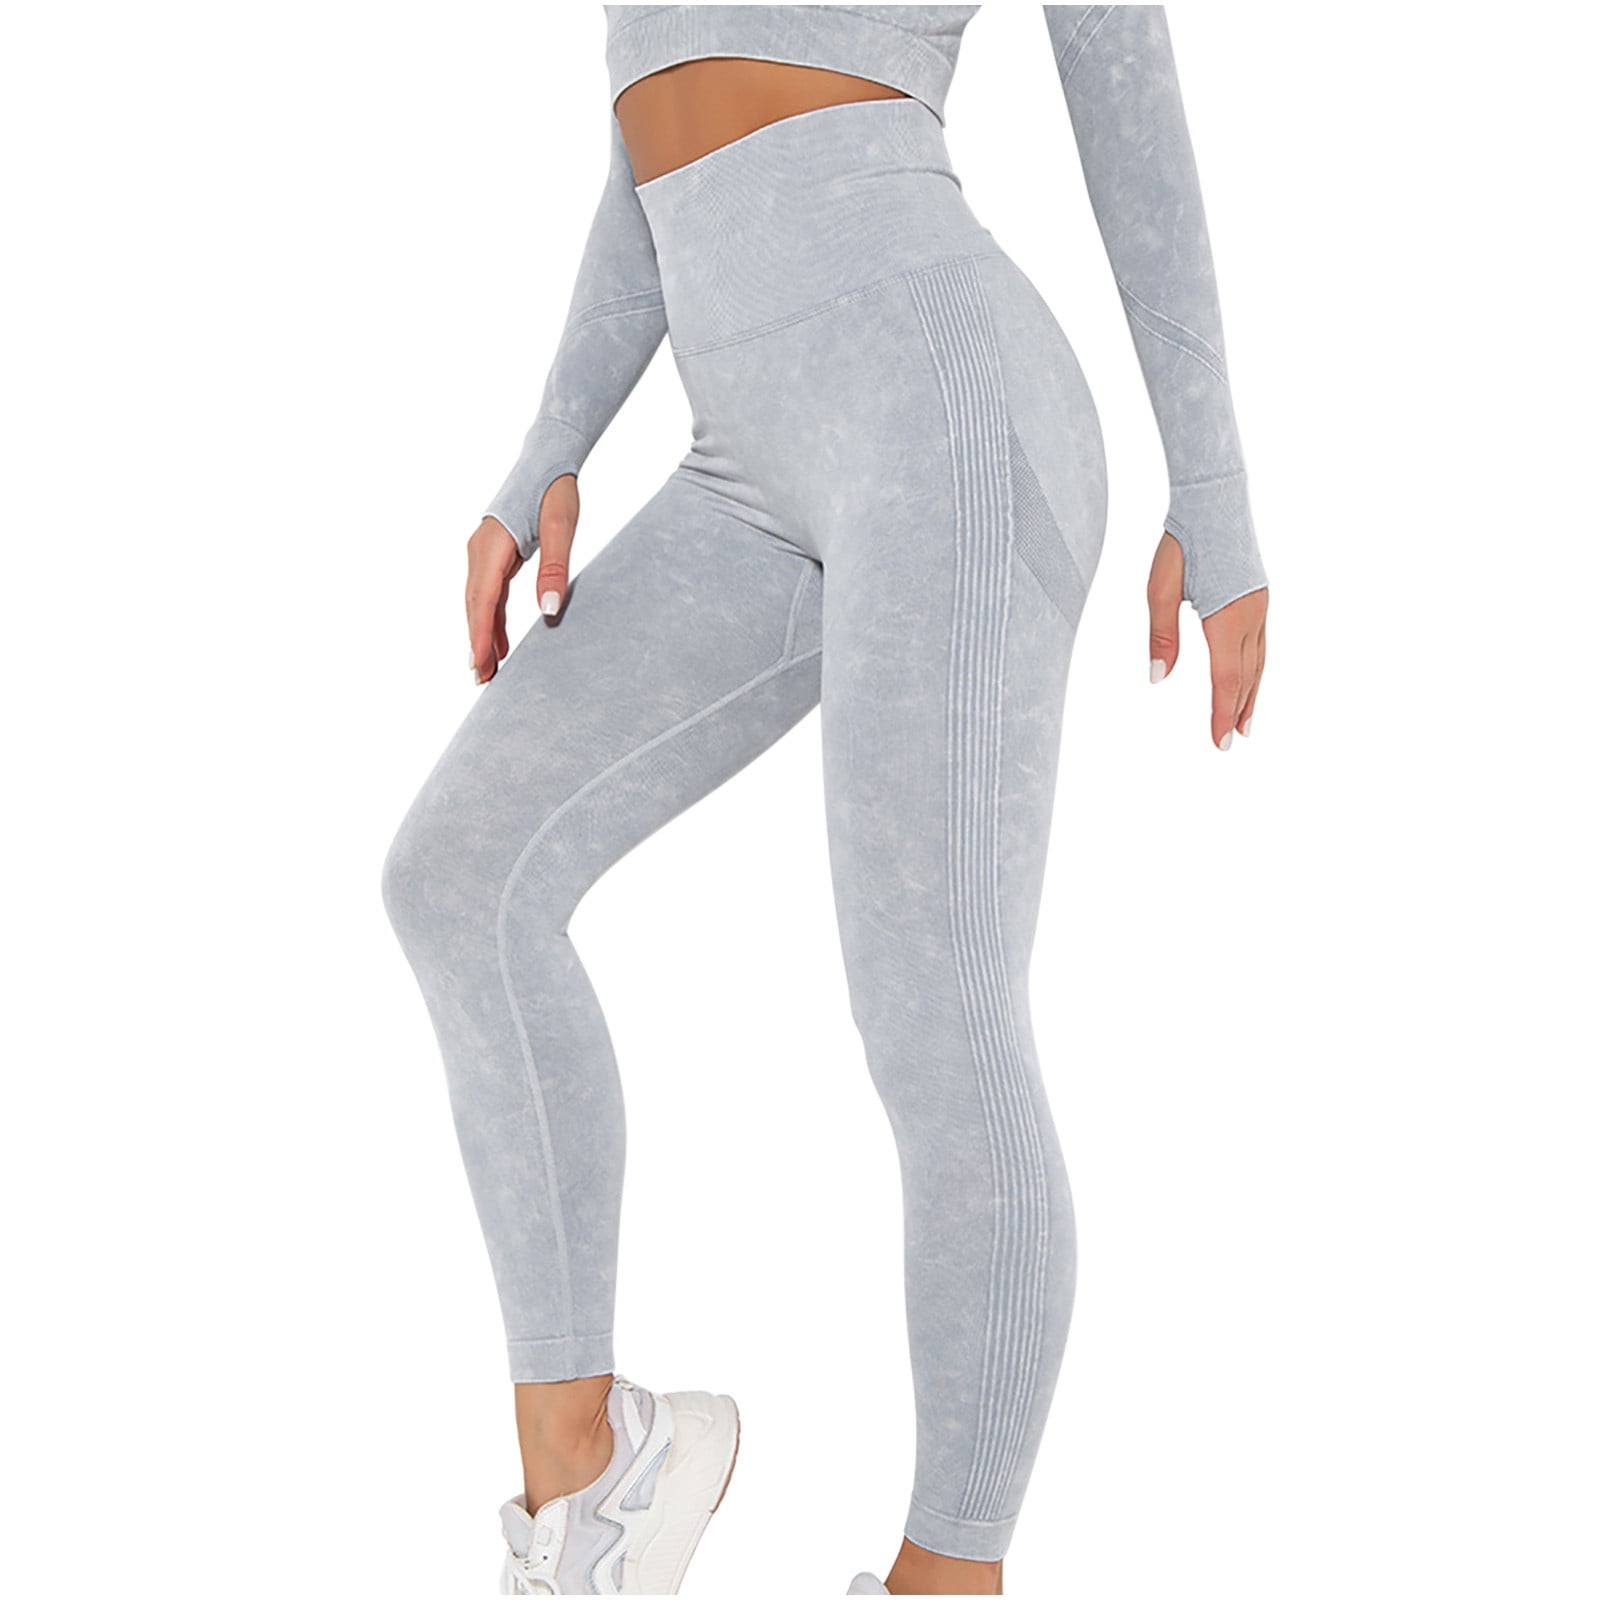 YWDJ Leggings for Women High Waist Plus Size European And American Seamless  Water Wash Knit Hygroscopic Sexy Hip Lifting Hip Sweating Yoga Pants Sports  Fitness Pants TightsPurpleL 